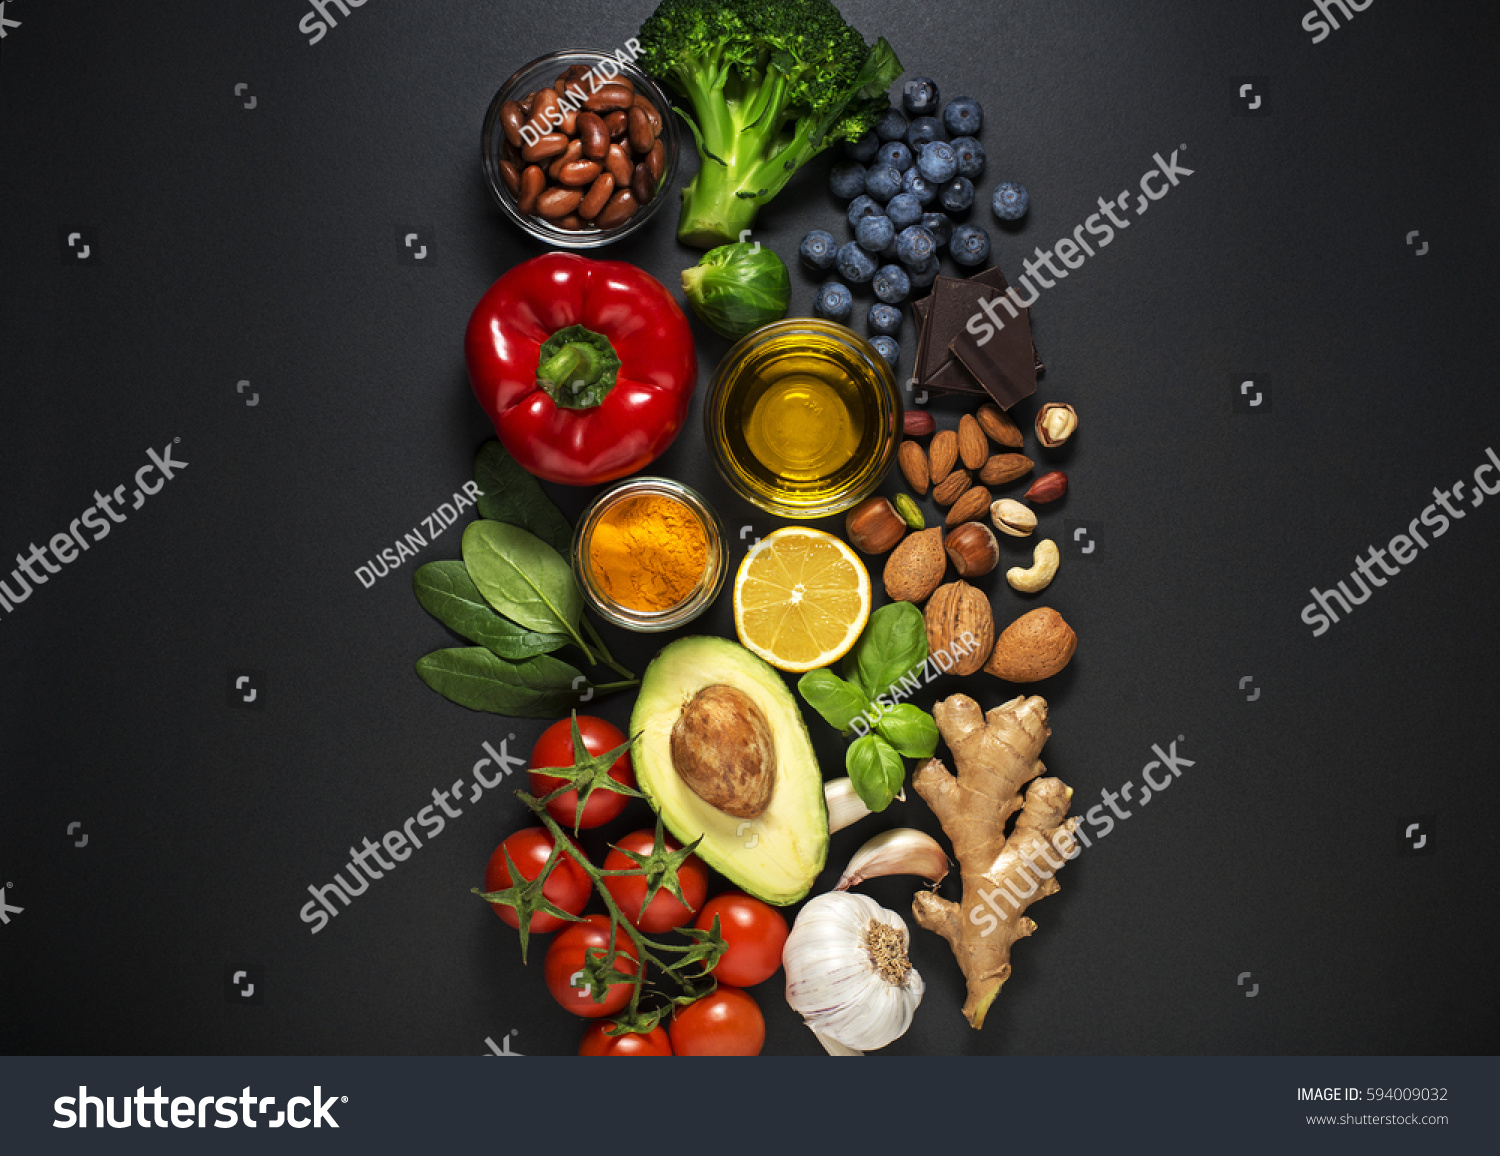 Selection Healthy Food Healthy Diet Foods Stock Photo Edit Now 594009032